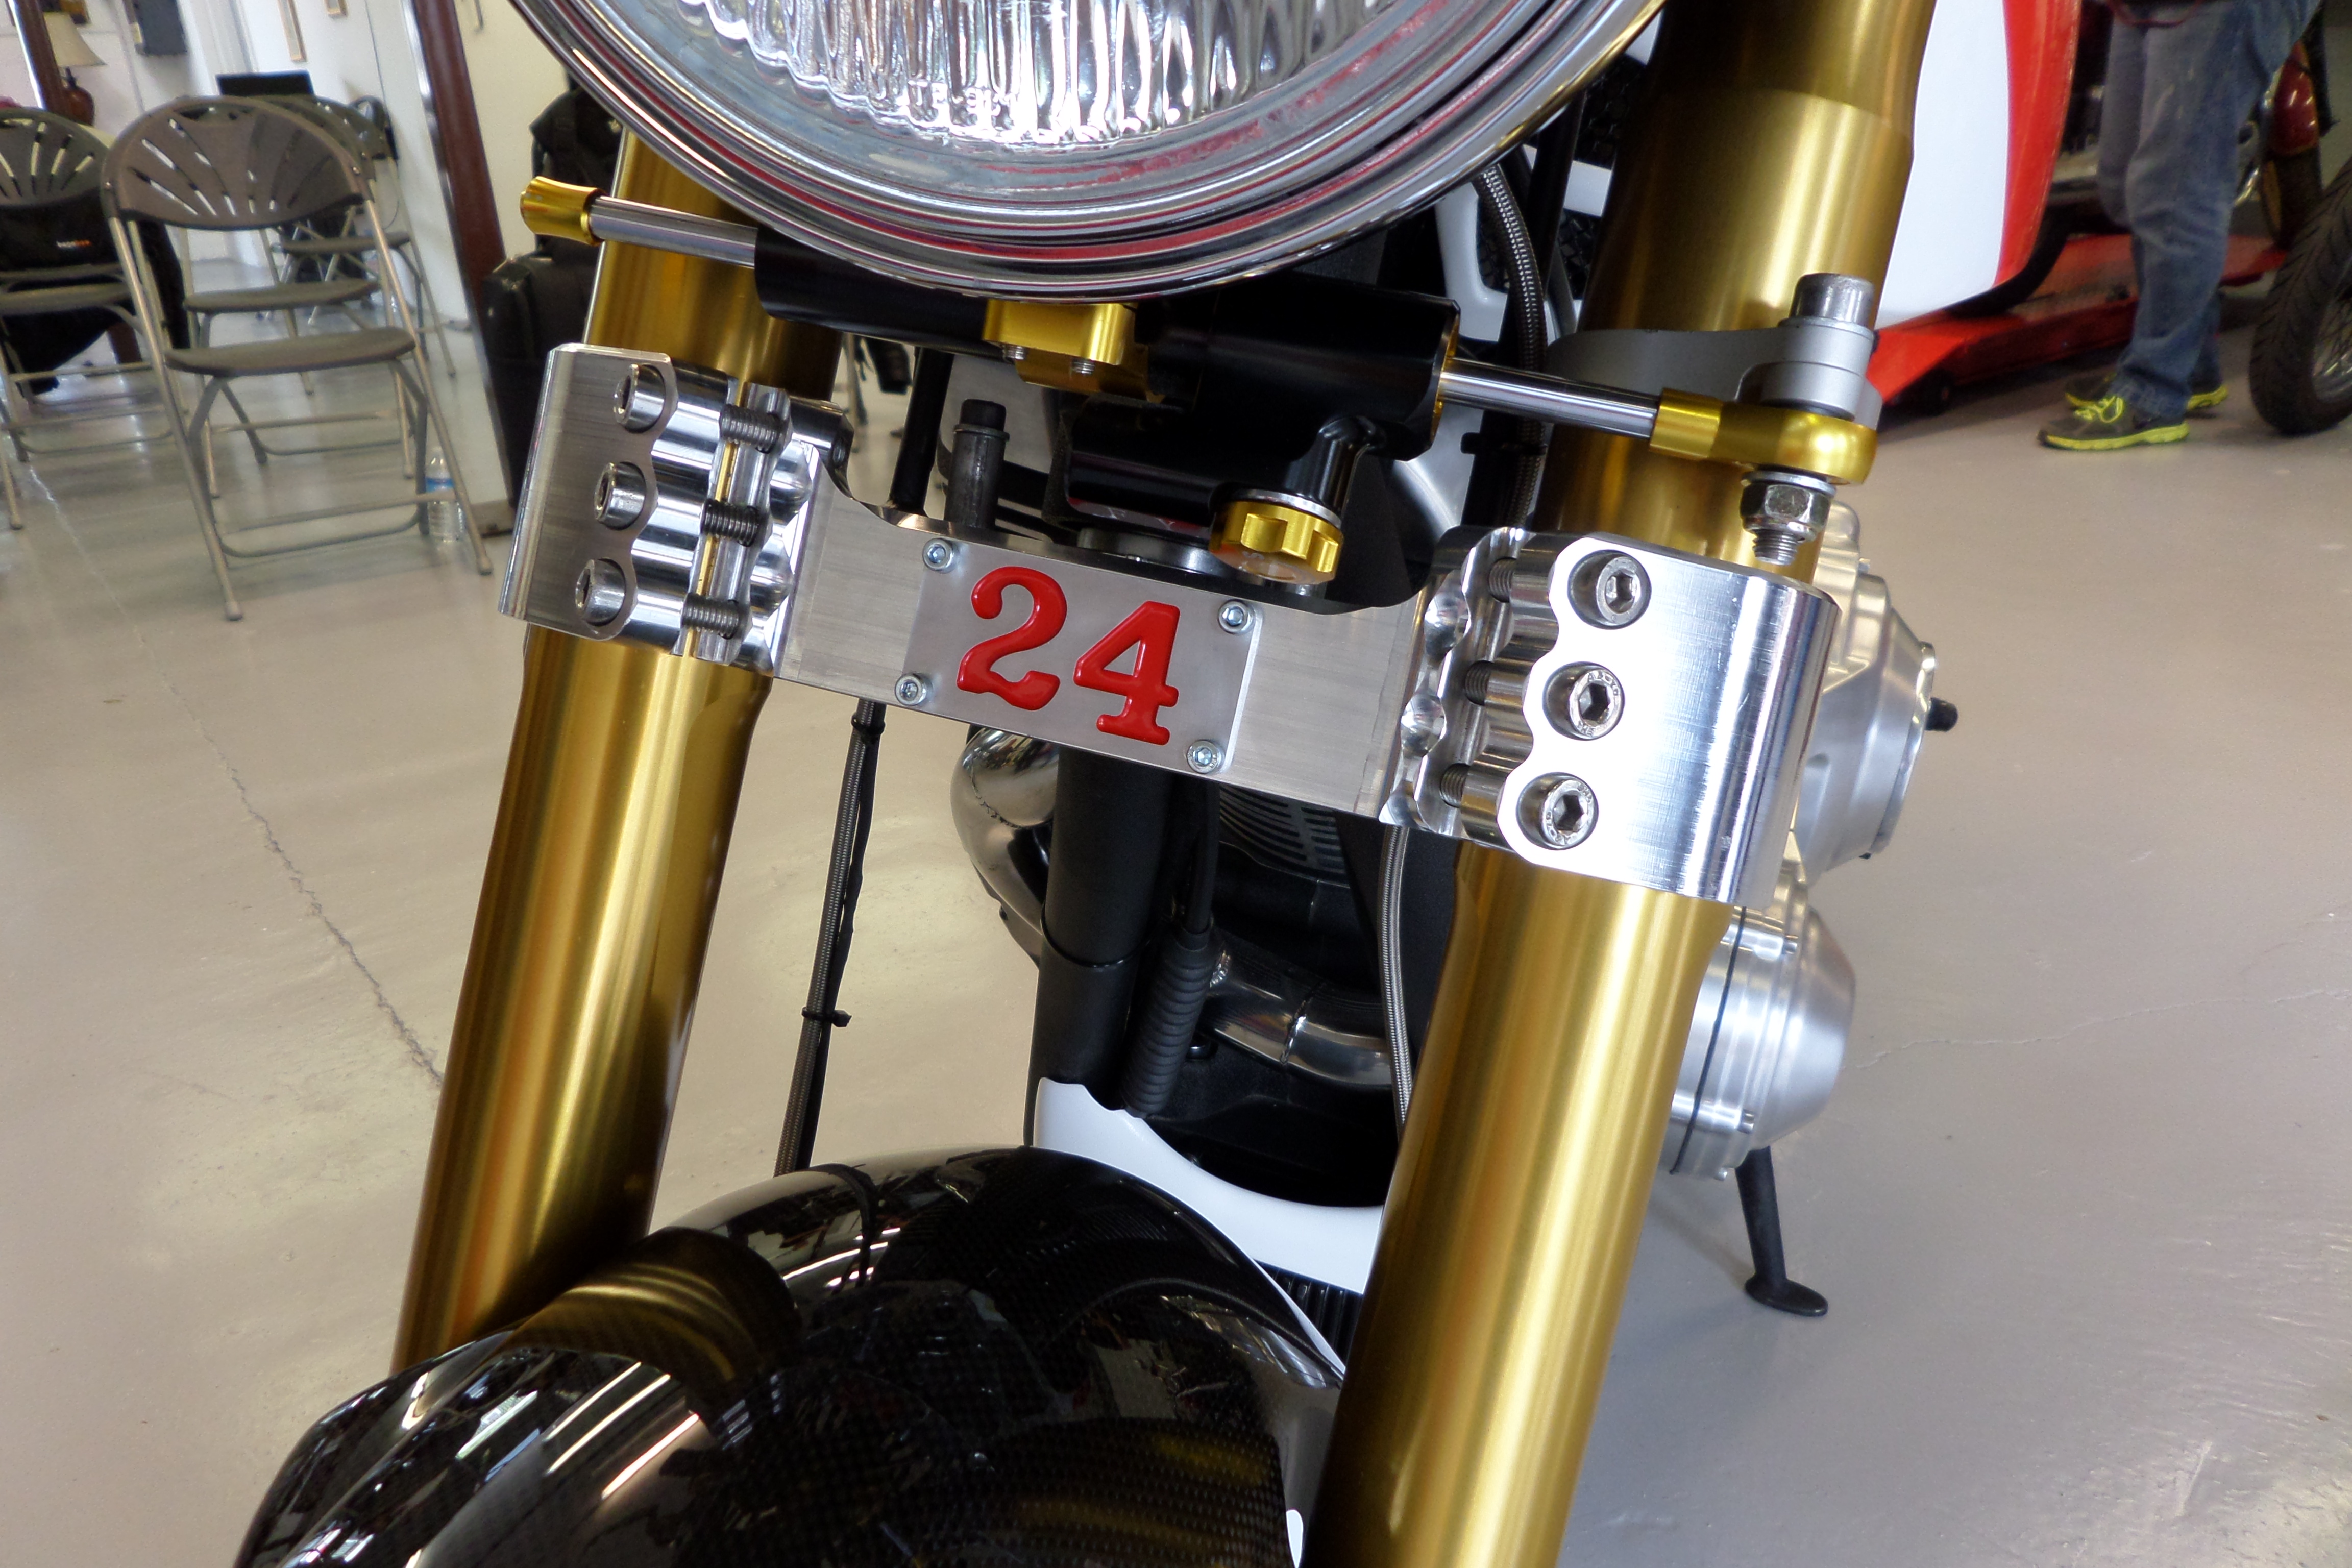 Hesketh 24 officially unveiled